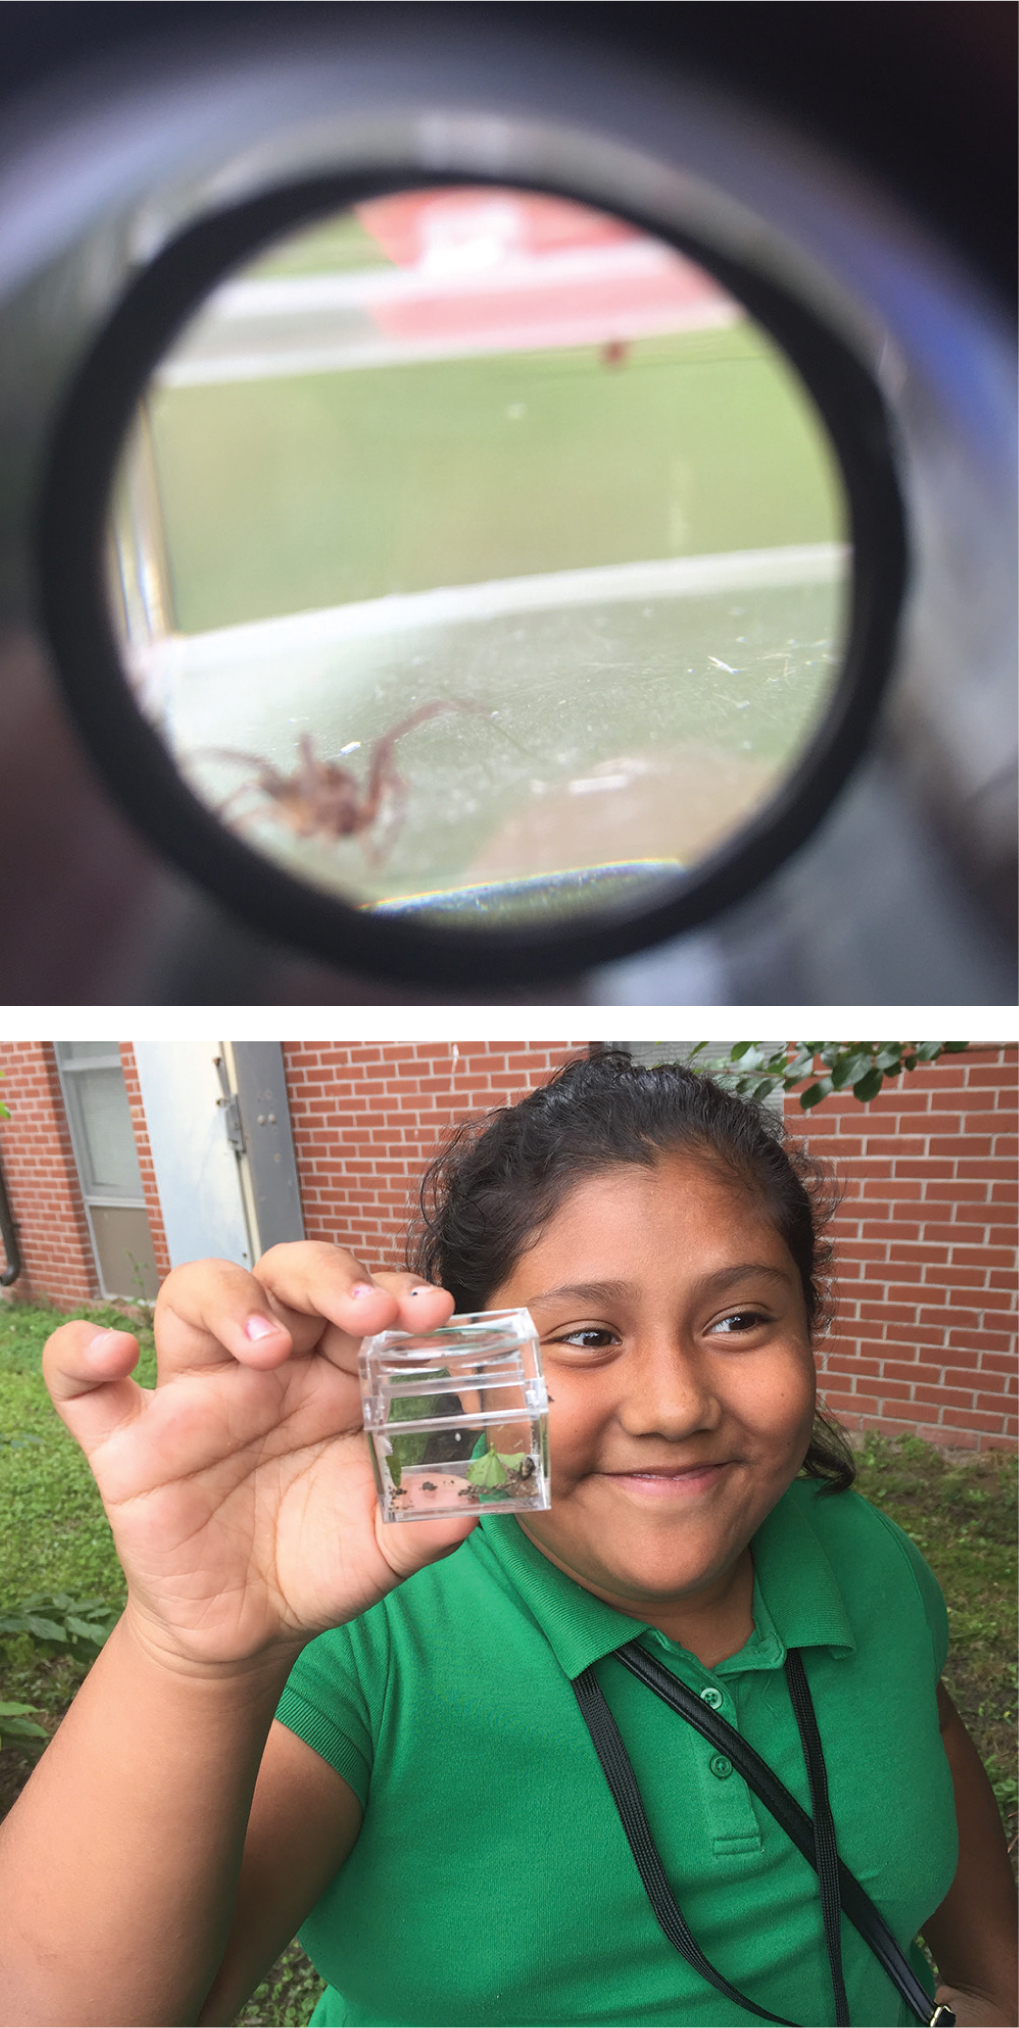 A spider viewed through a loupe (top) and a student excitedly shares her specimen (bottom).